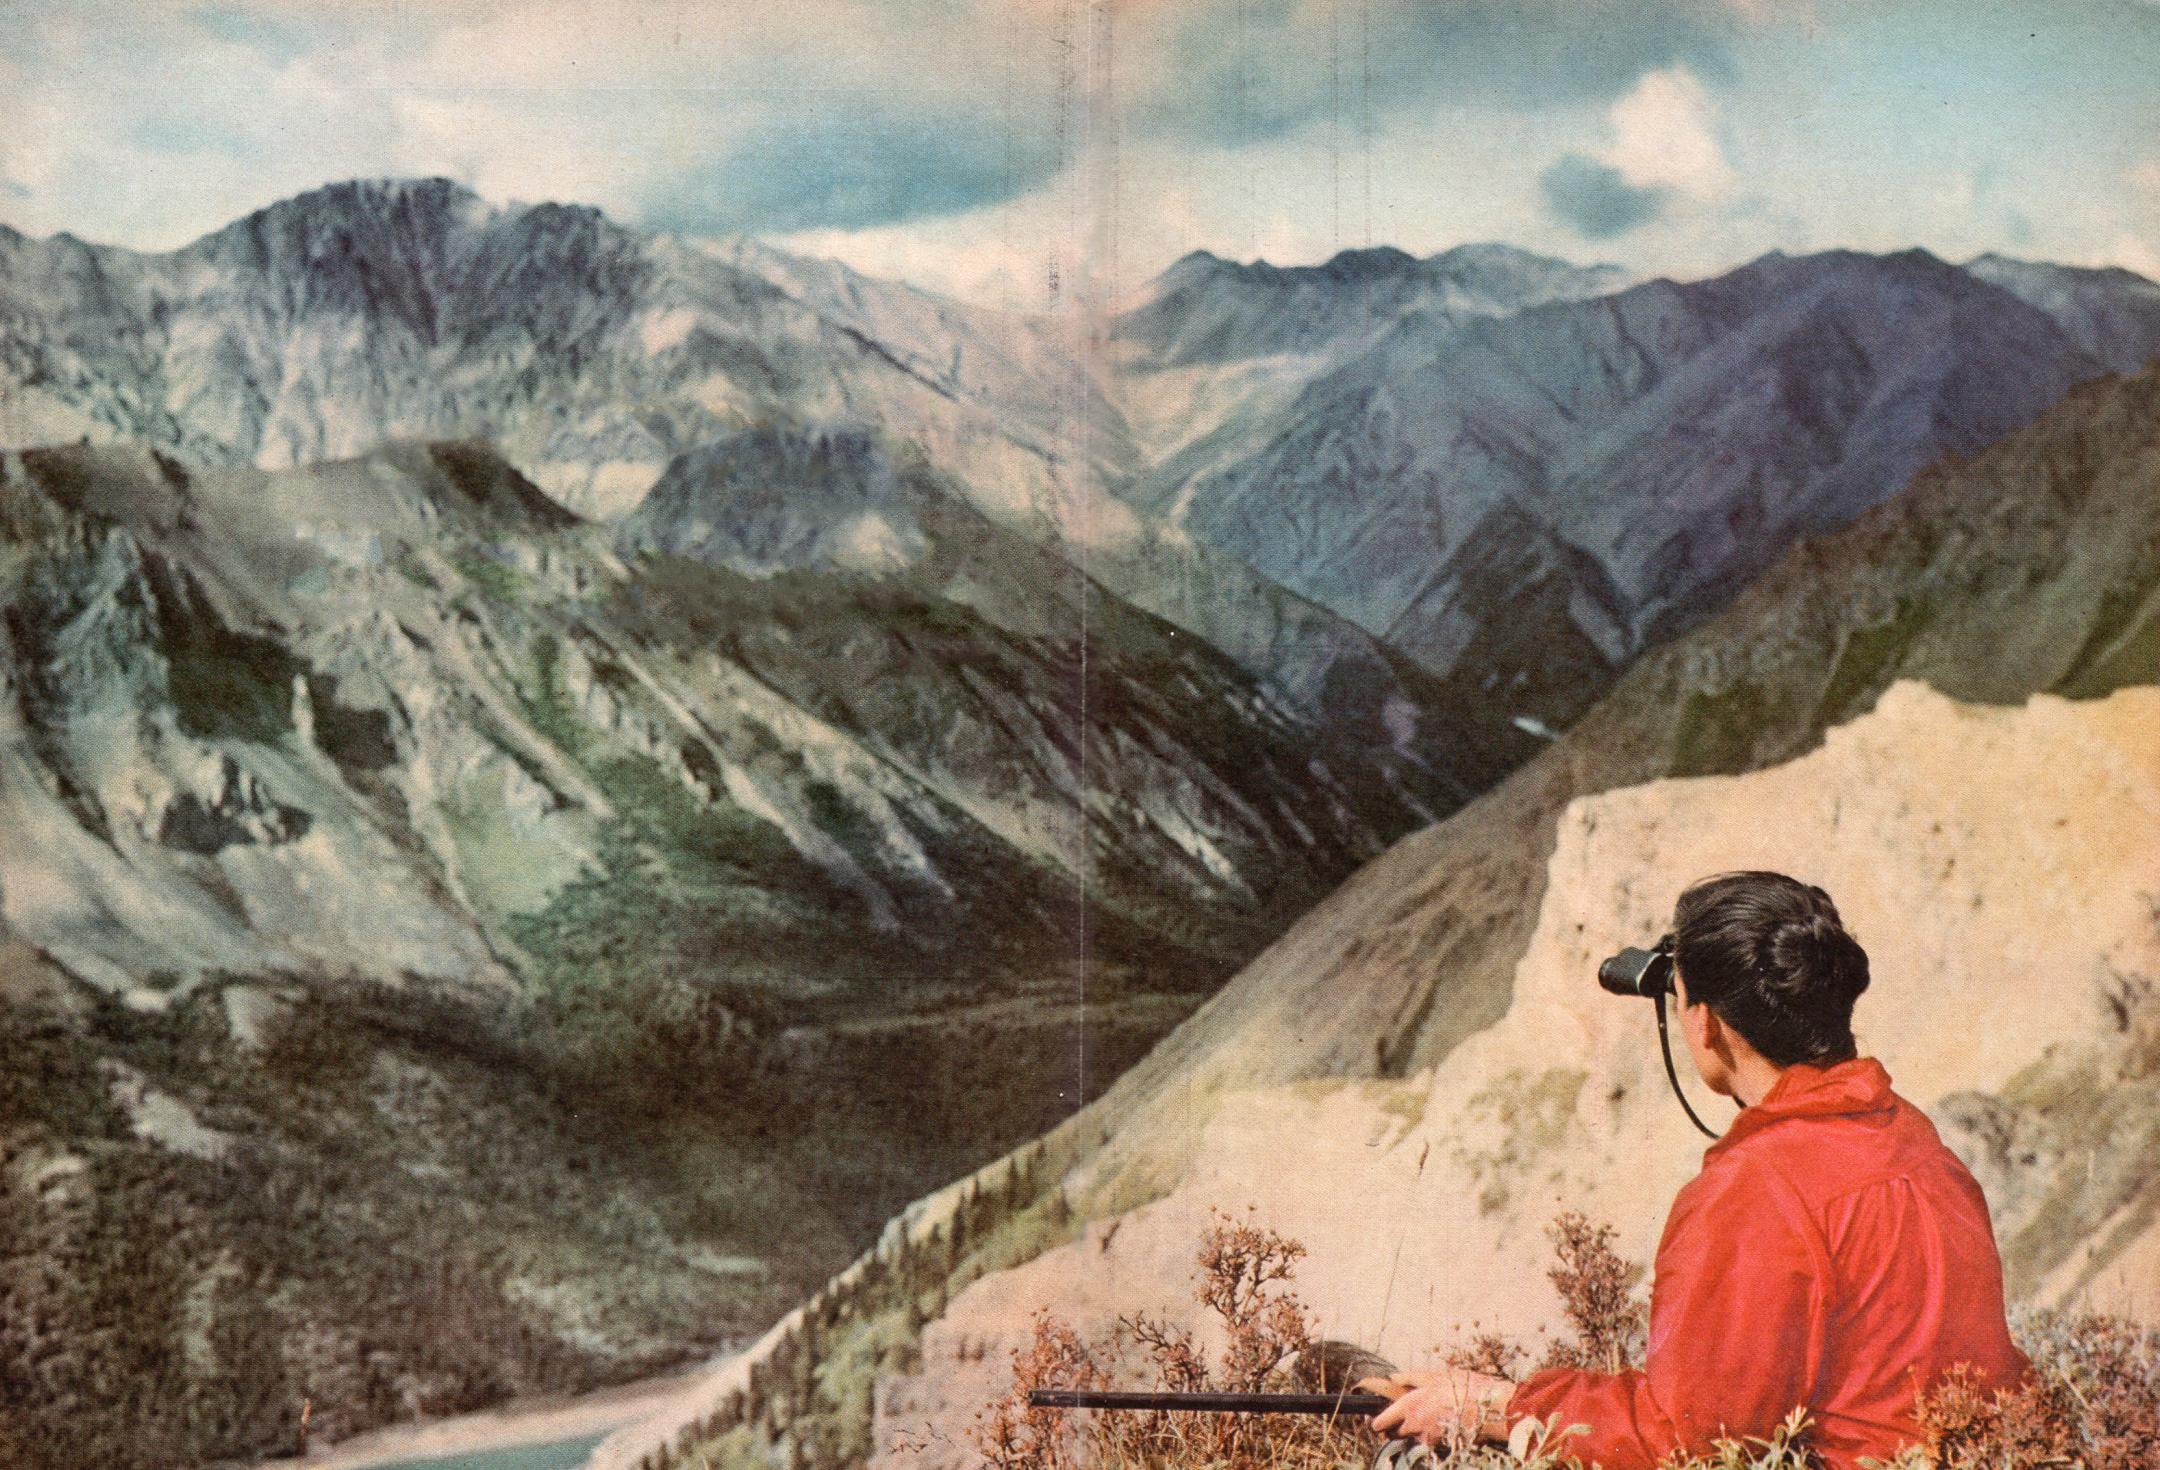 woman with red coat and binoculars looking at a beautiful mountain scenery in the distance